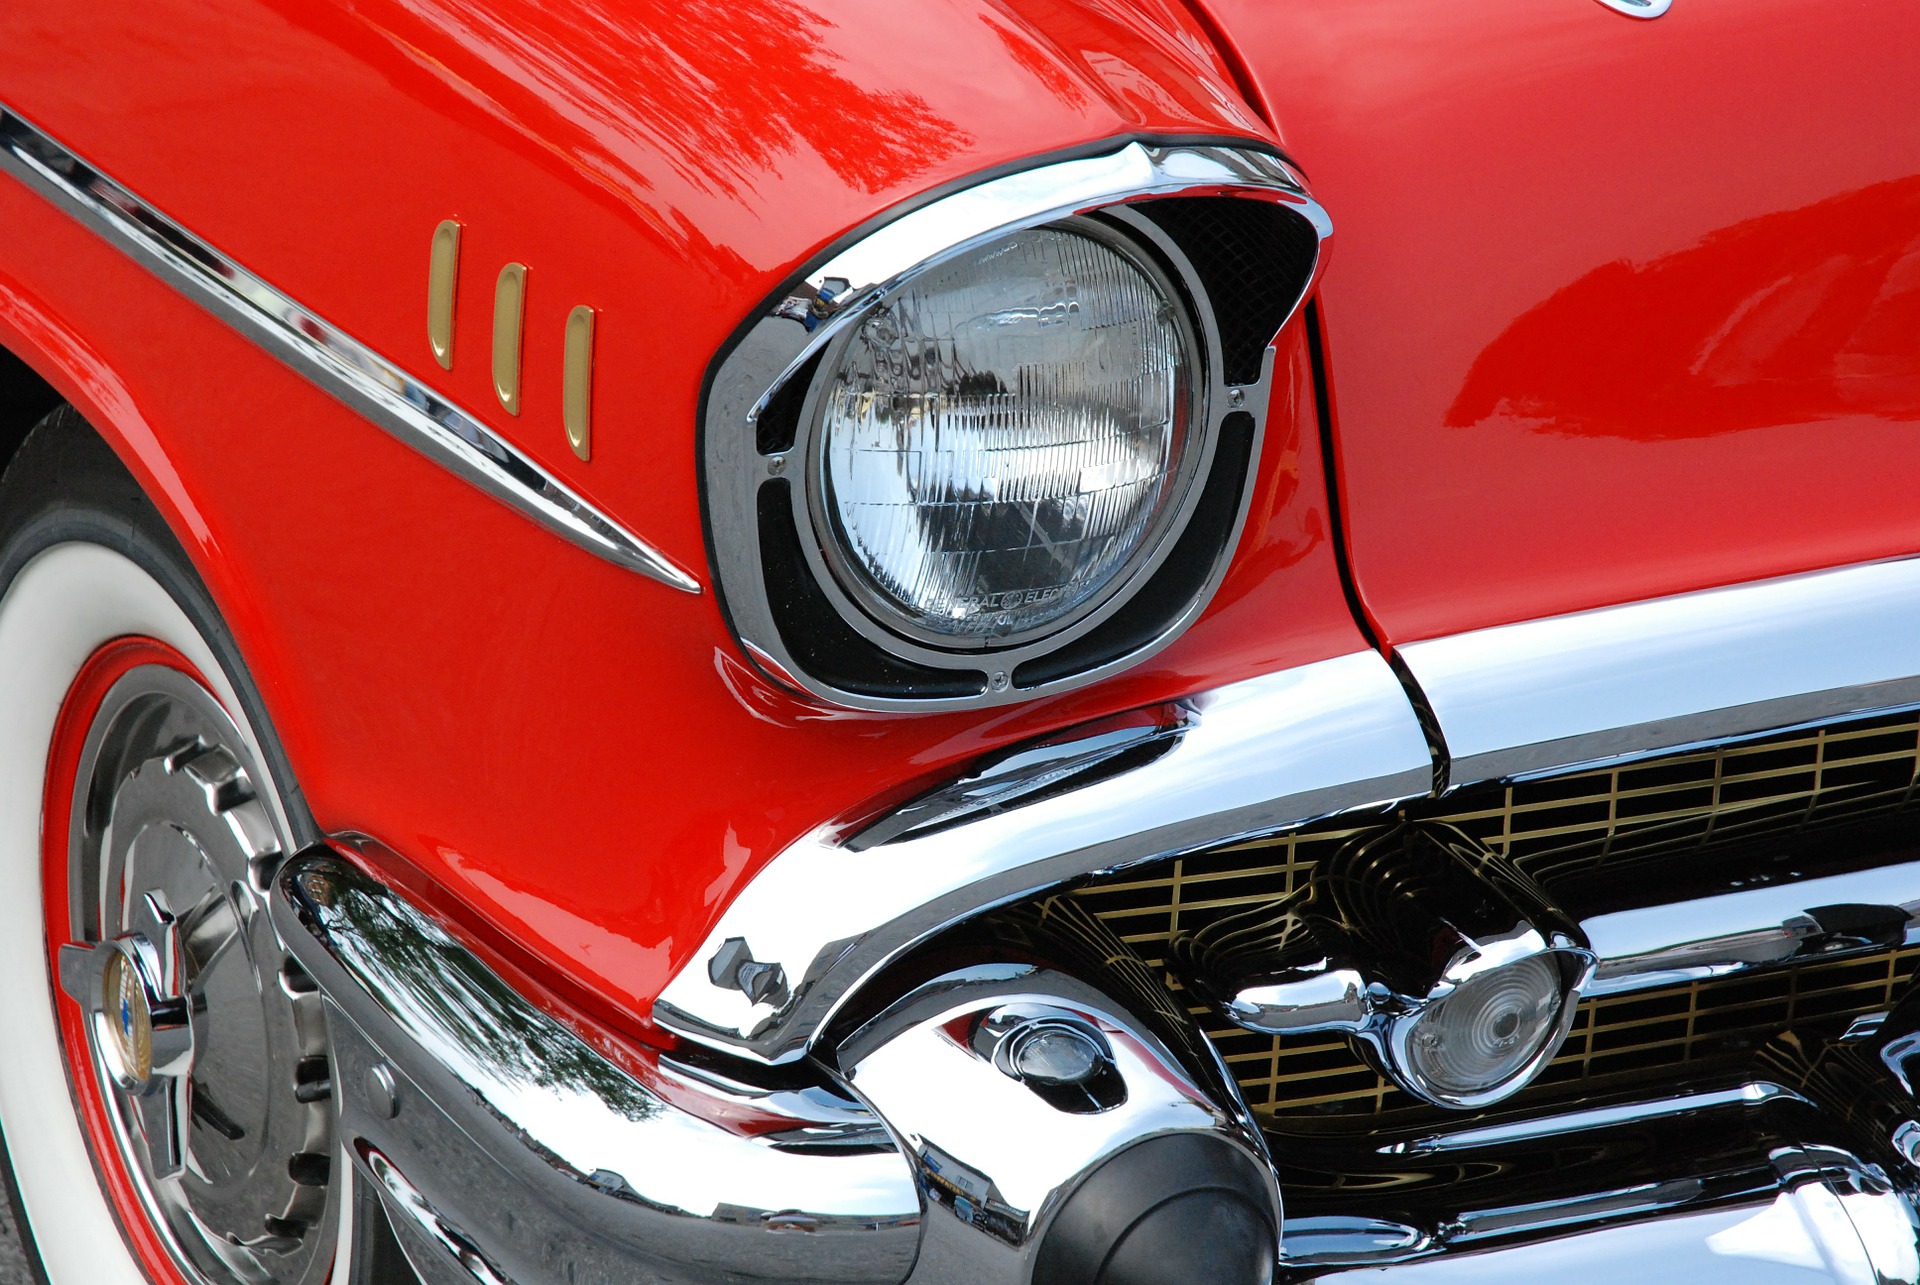 3 Car Shows to Check Out in Virginia This Summer Warrenton Auto